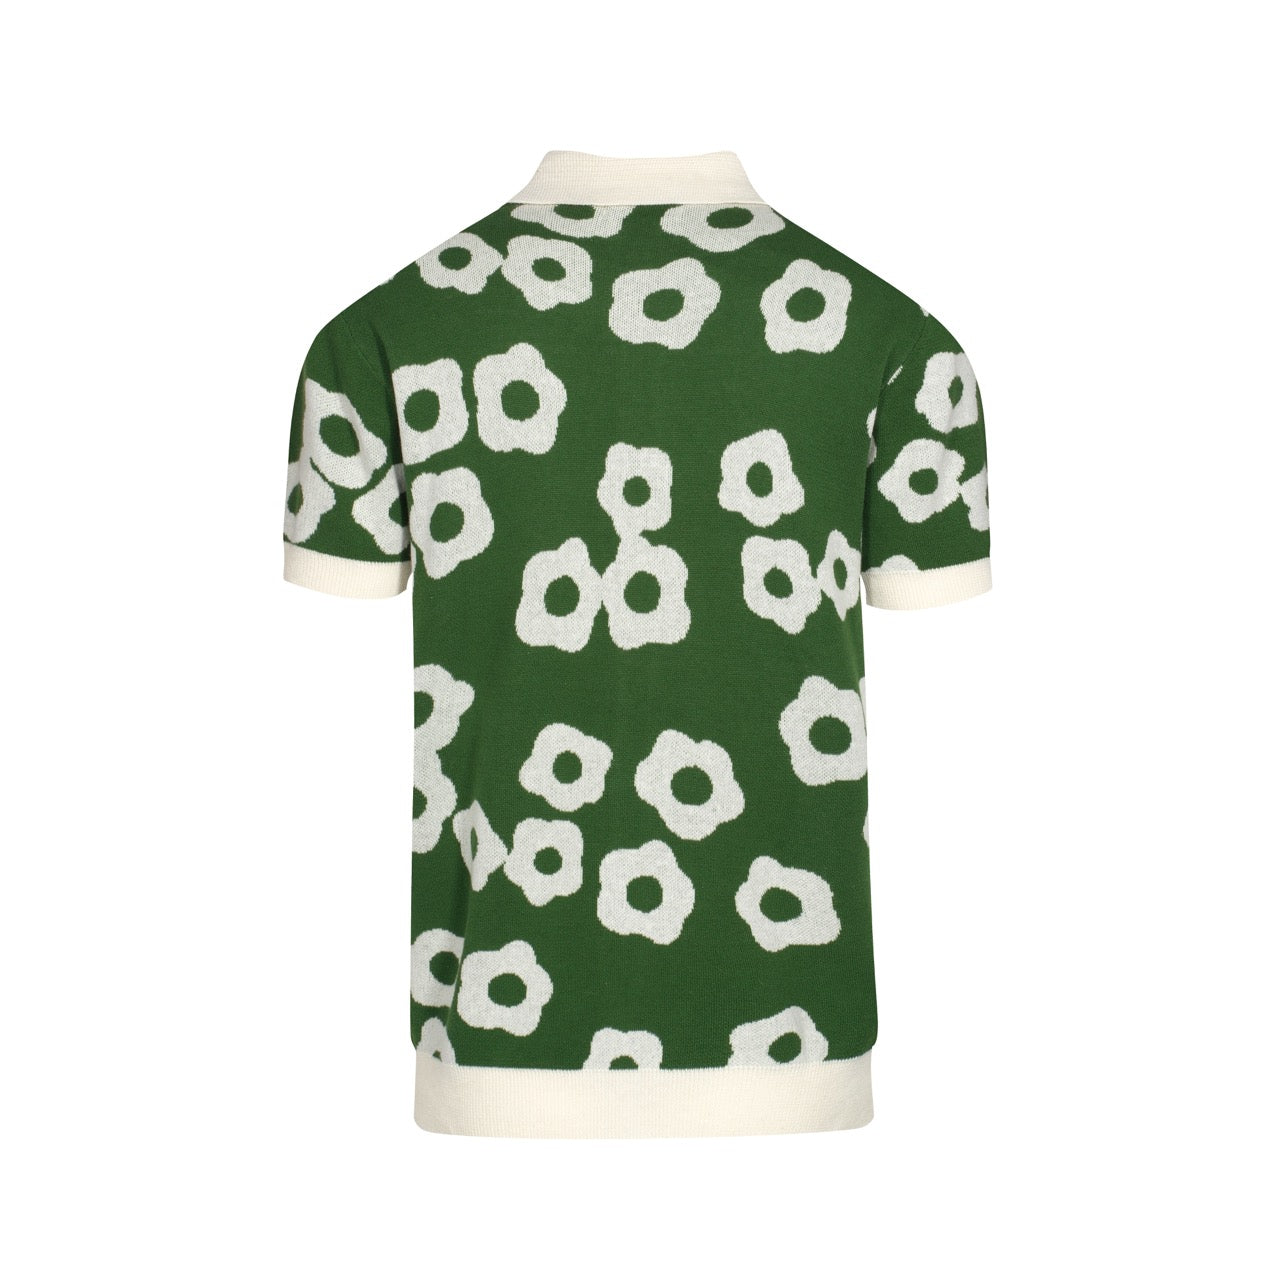 Men's Green And White Jacquard Design Knitted Short Sleeve Polo Shirt